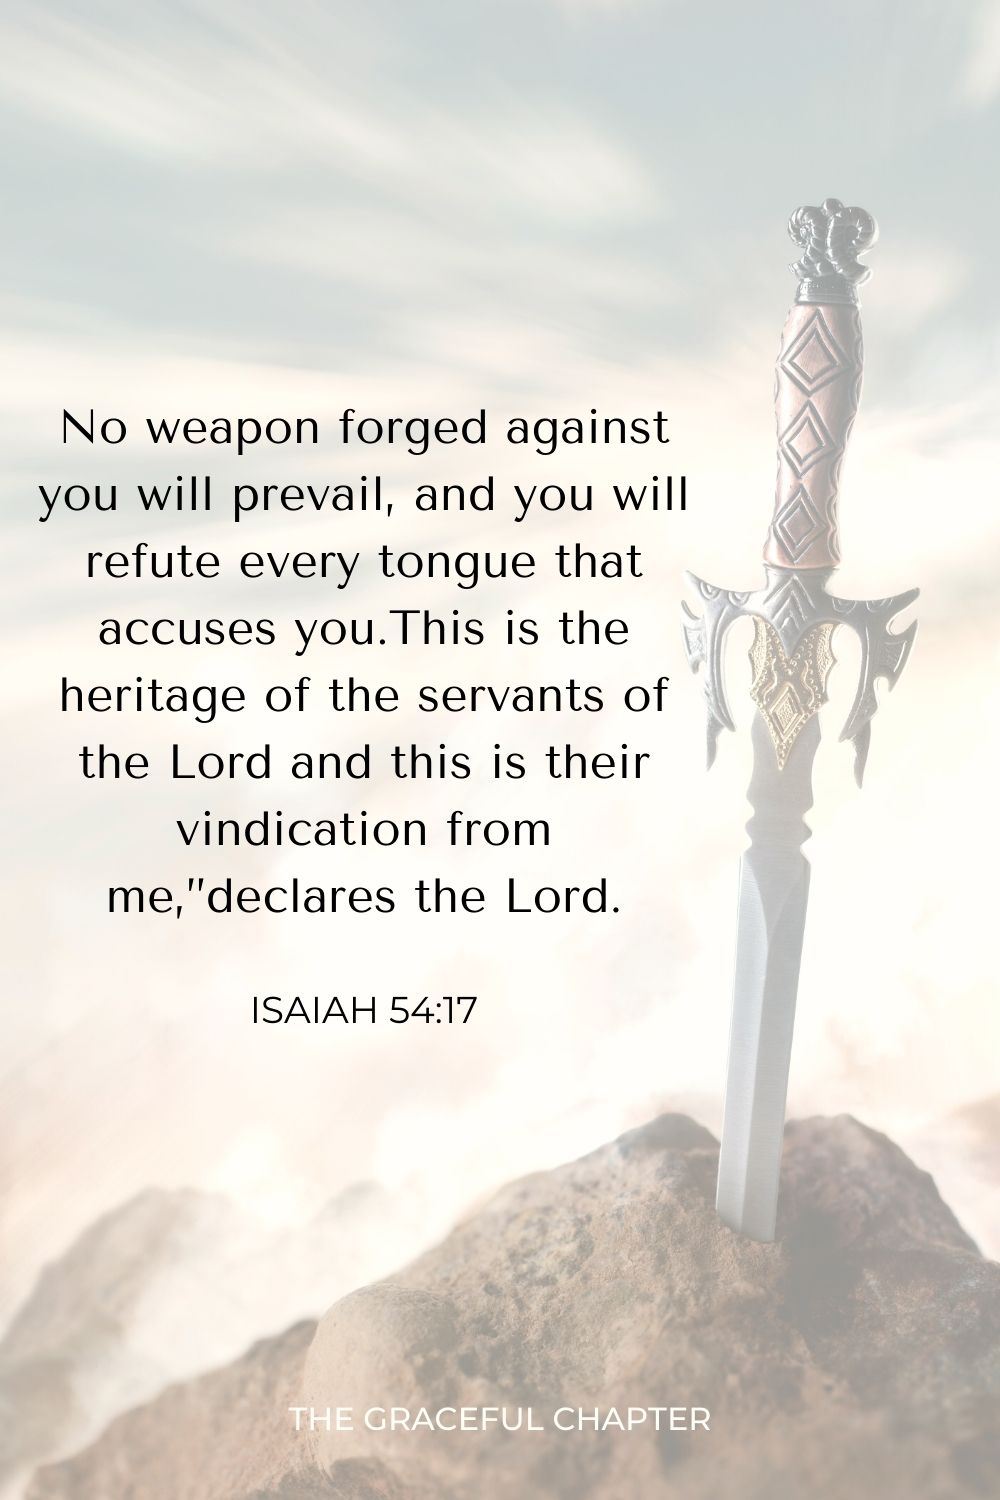 No weapon forged against you will prevail, and you will refute every tongue that accuses you. This is the heritage of the servants of the Lord and this is their vindication from me,” declares the Lord. Isaiah 54:17